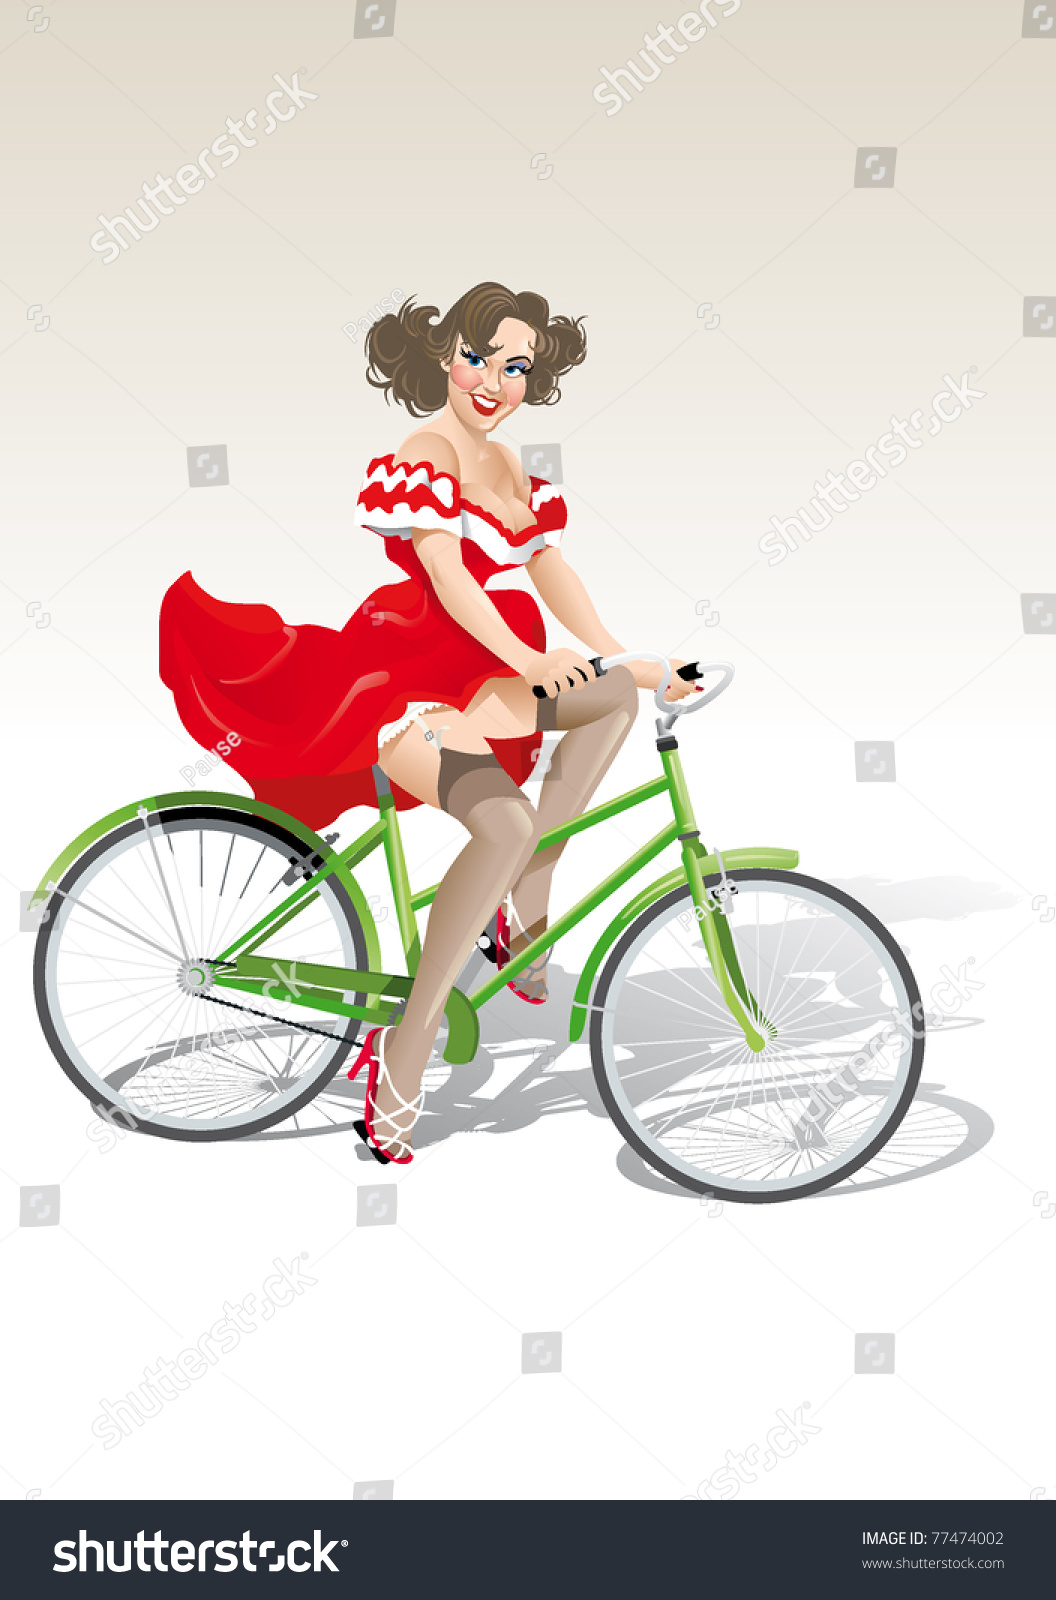 free clip art woman on bicycle - photo #35